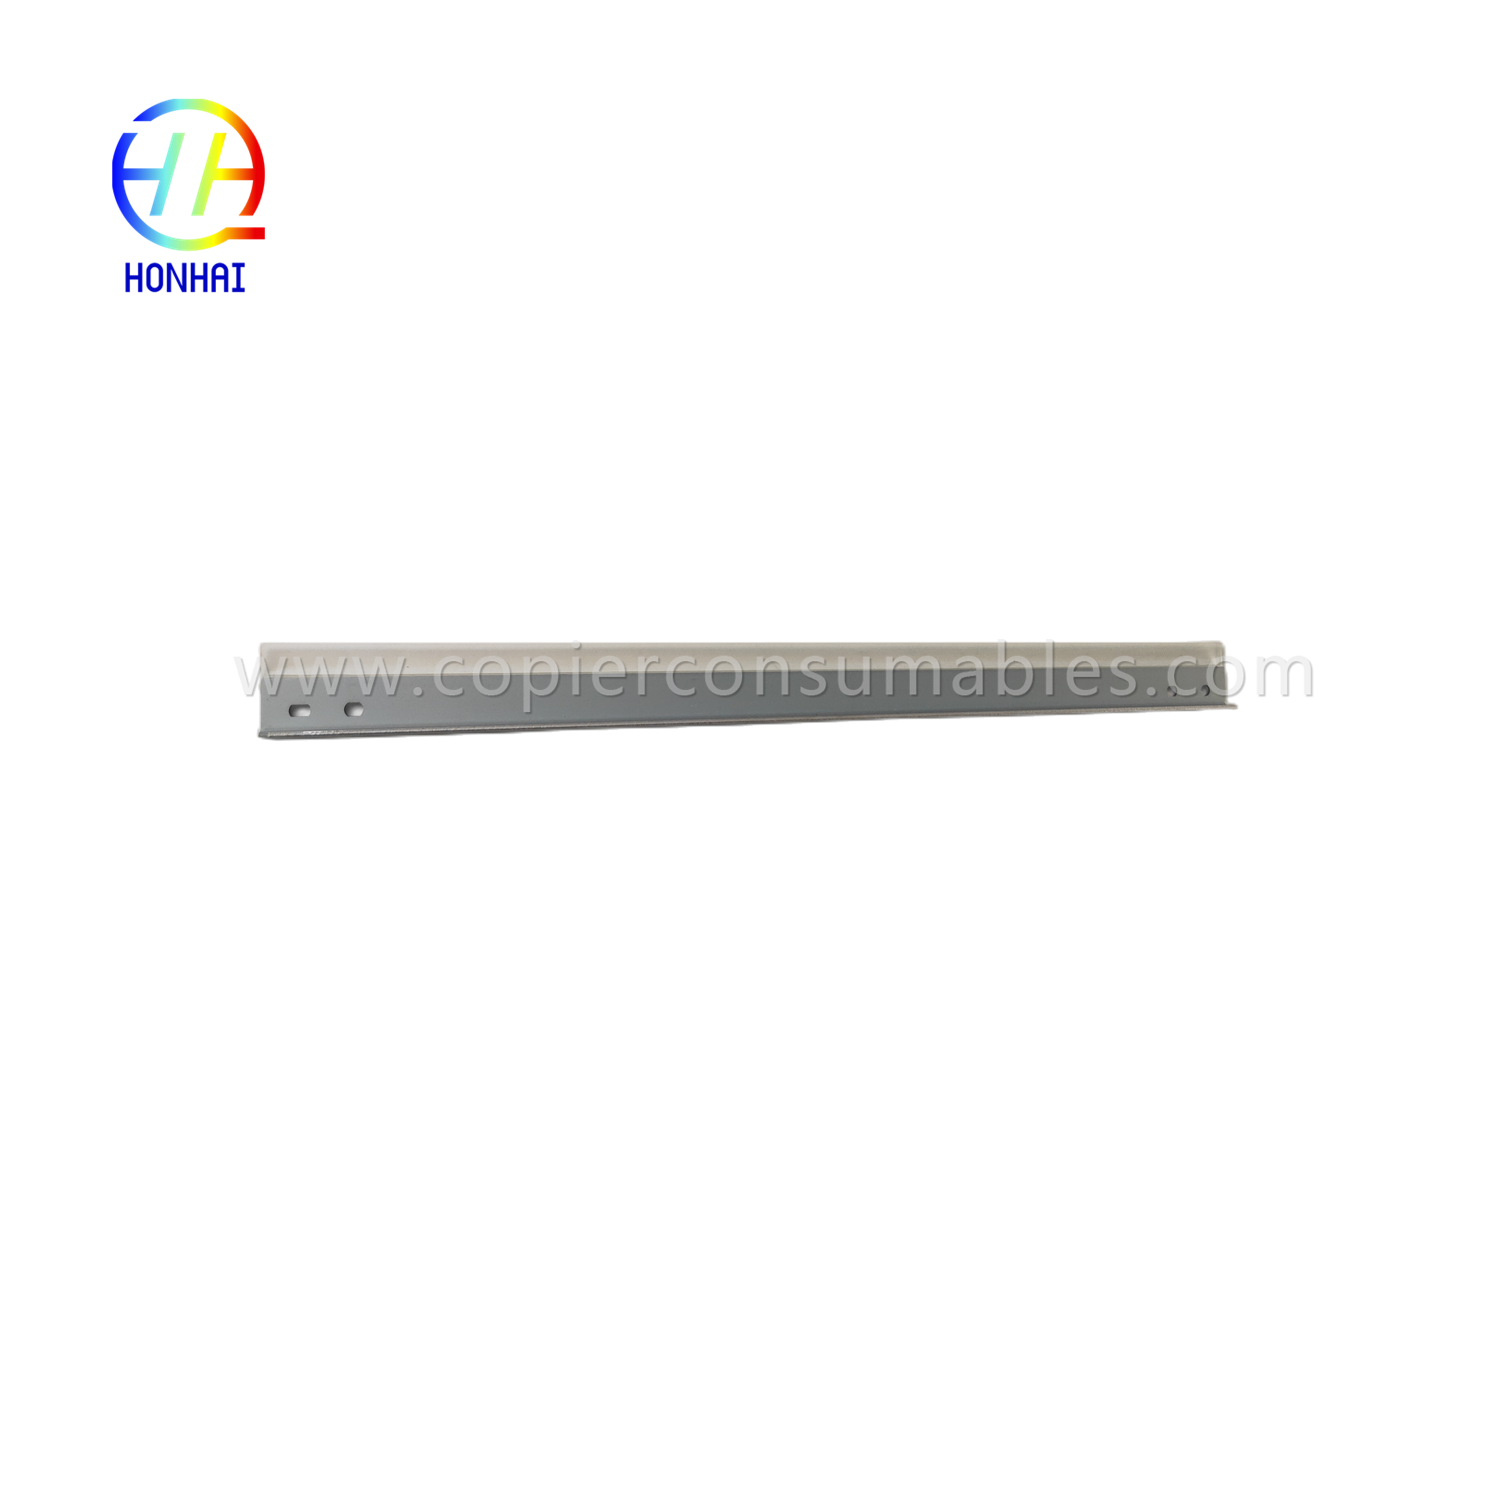 https://c585.goodao.net/drum-cleaning-blade-for-ricoh-mp2501-2015-2001-2001l-2501l-ad04-2083-ad042083-product/